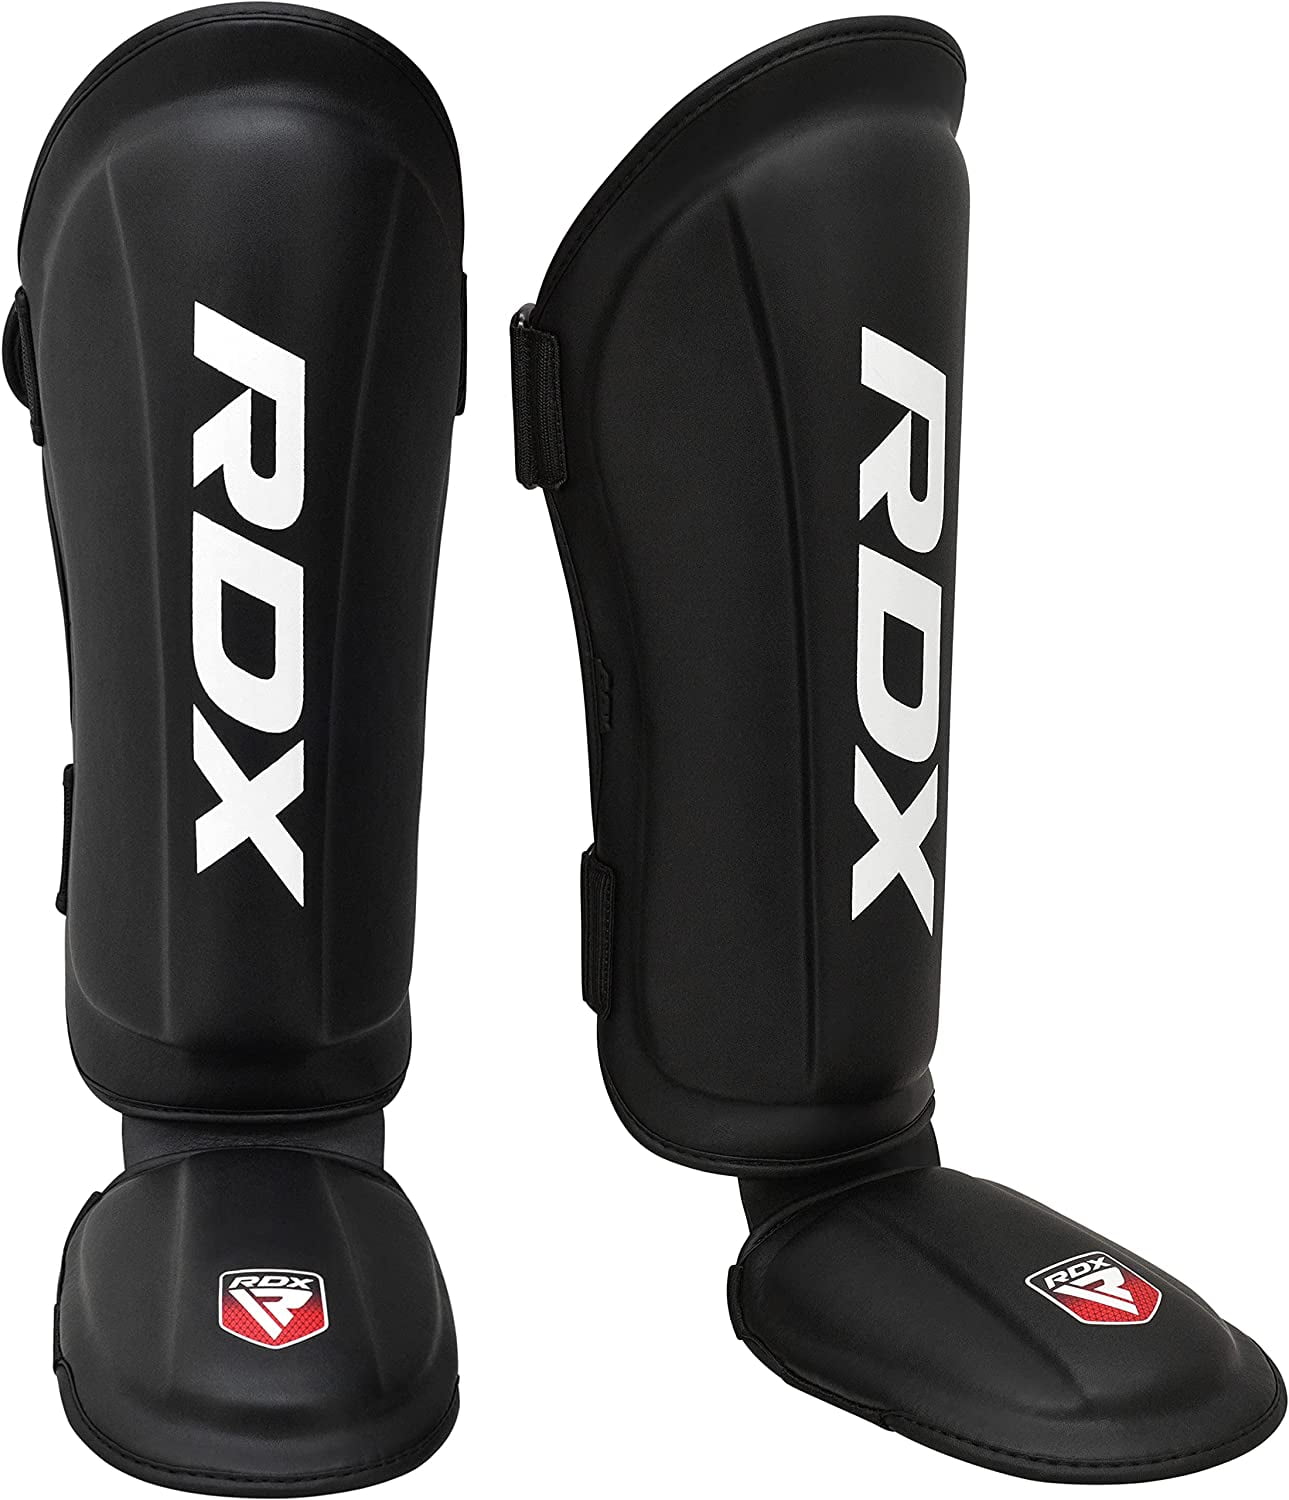 MMA Fighting and Training Pads Muay Thai RDX Shin Guards for Kickboxing 